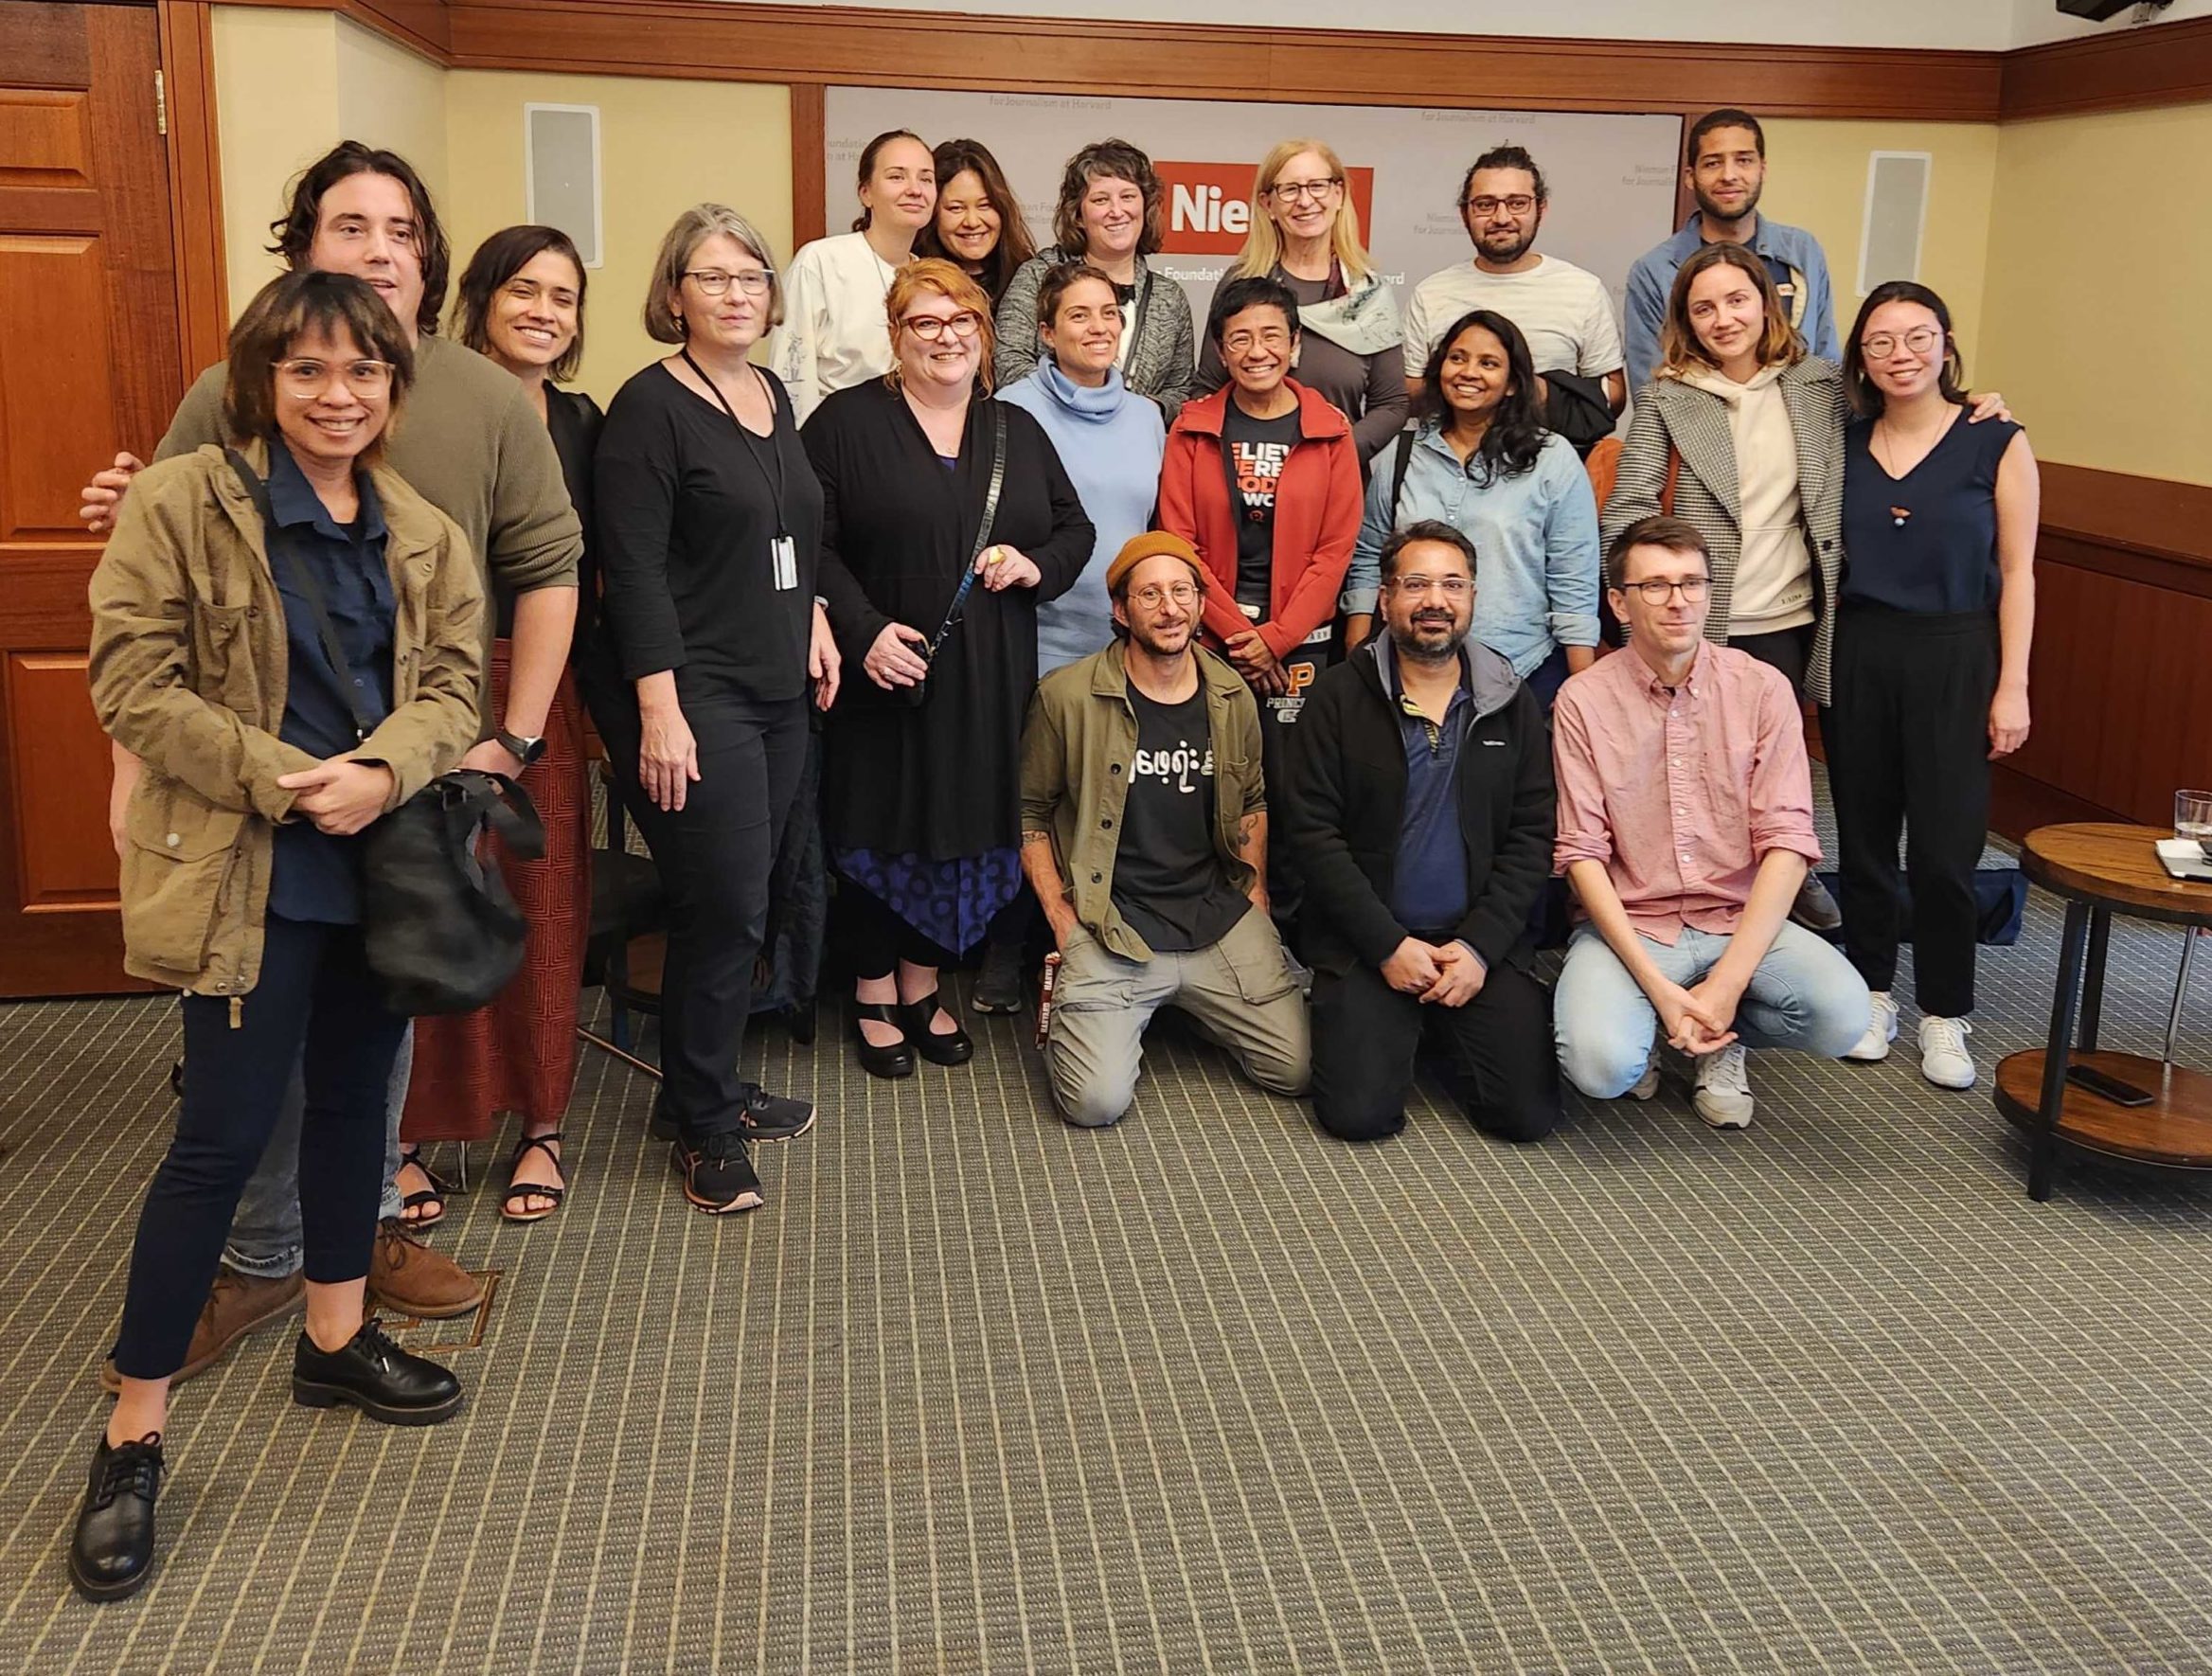 Maria Ressa (center, with orange jacket) and Dr. Julie Posetti (with shoulder bag) meet with the 2023 Nieman Fellows in Cambridge on Nov. 12, 2022.